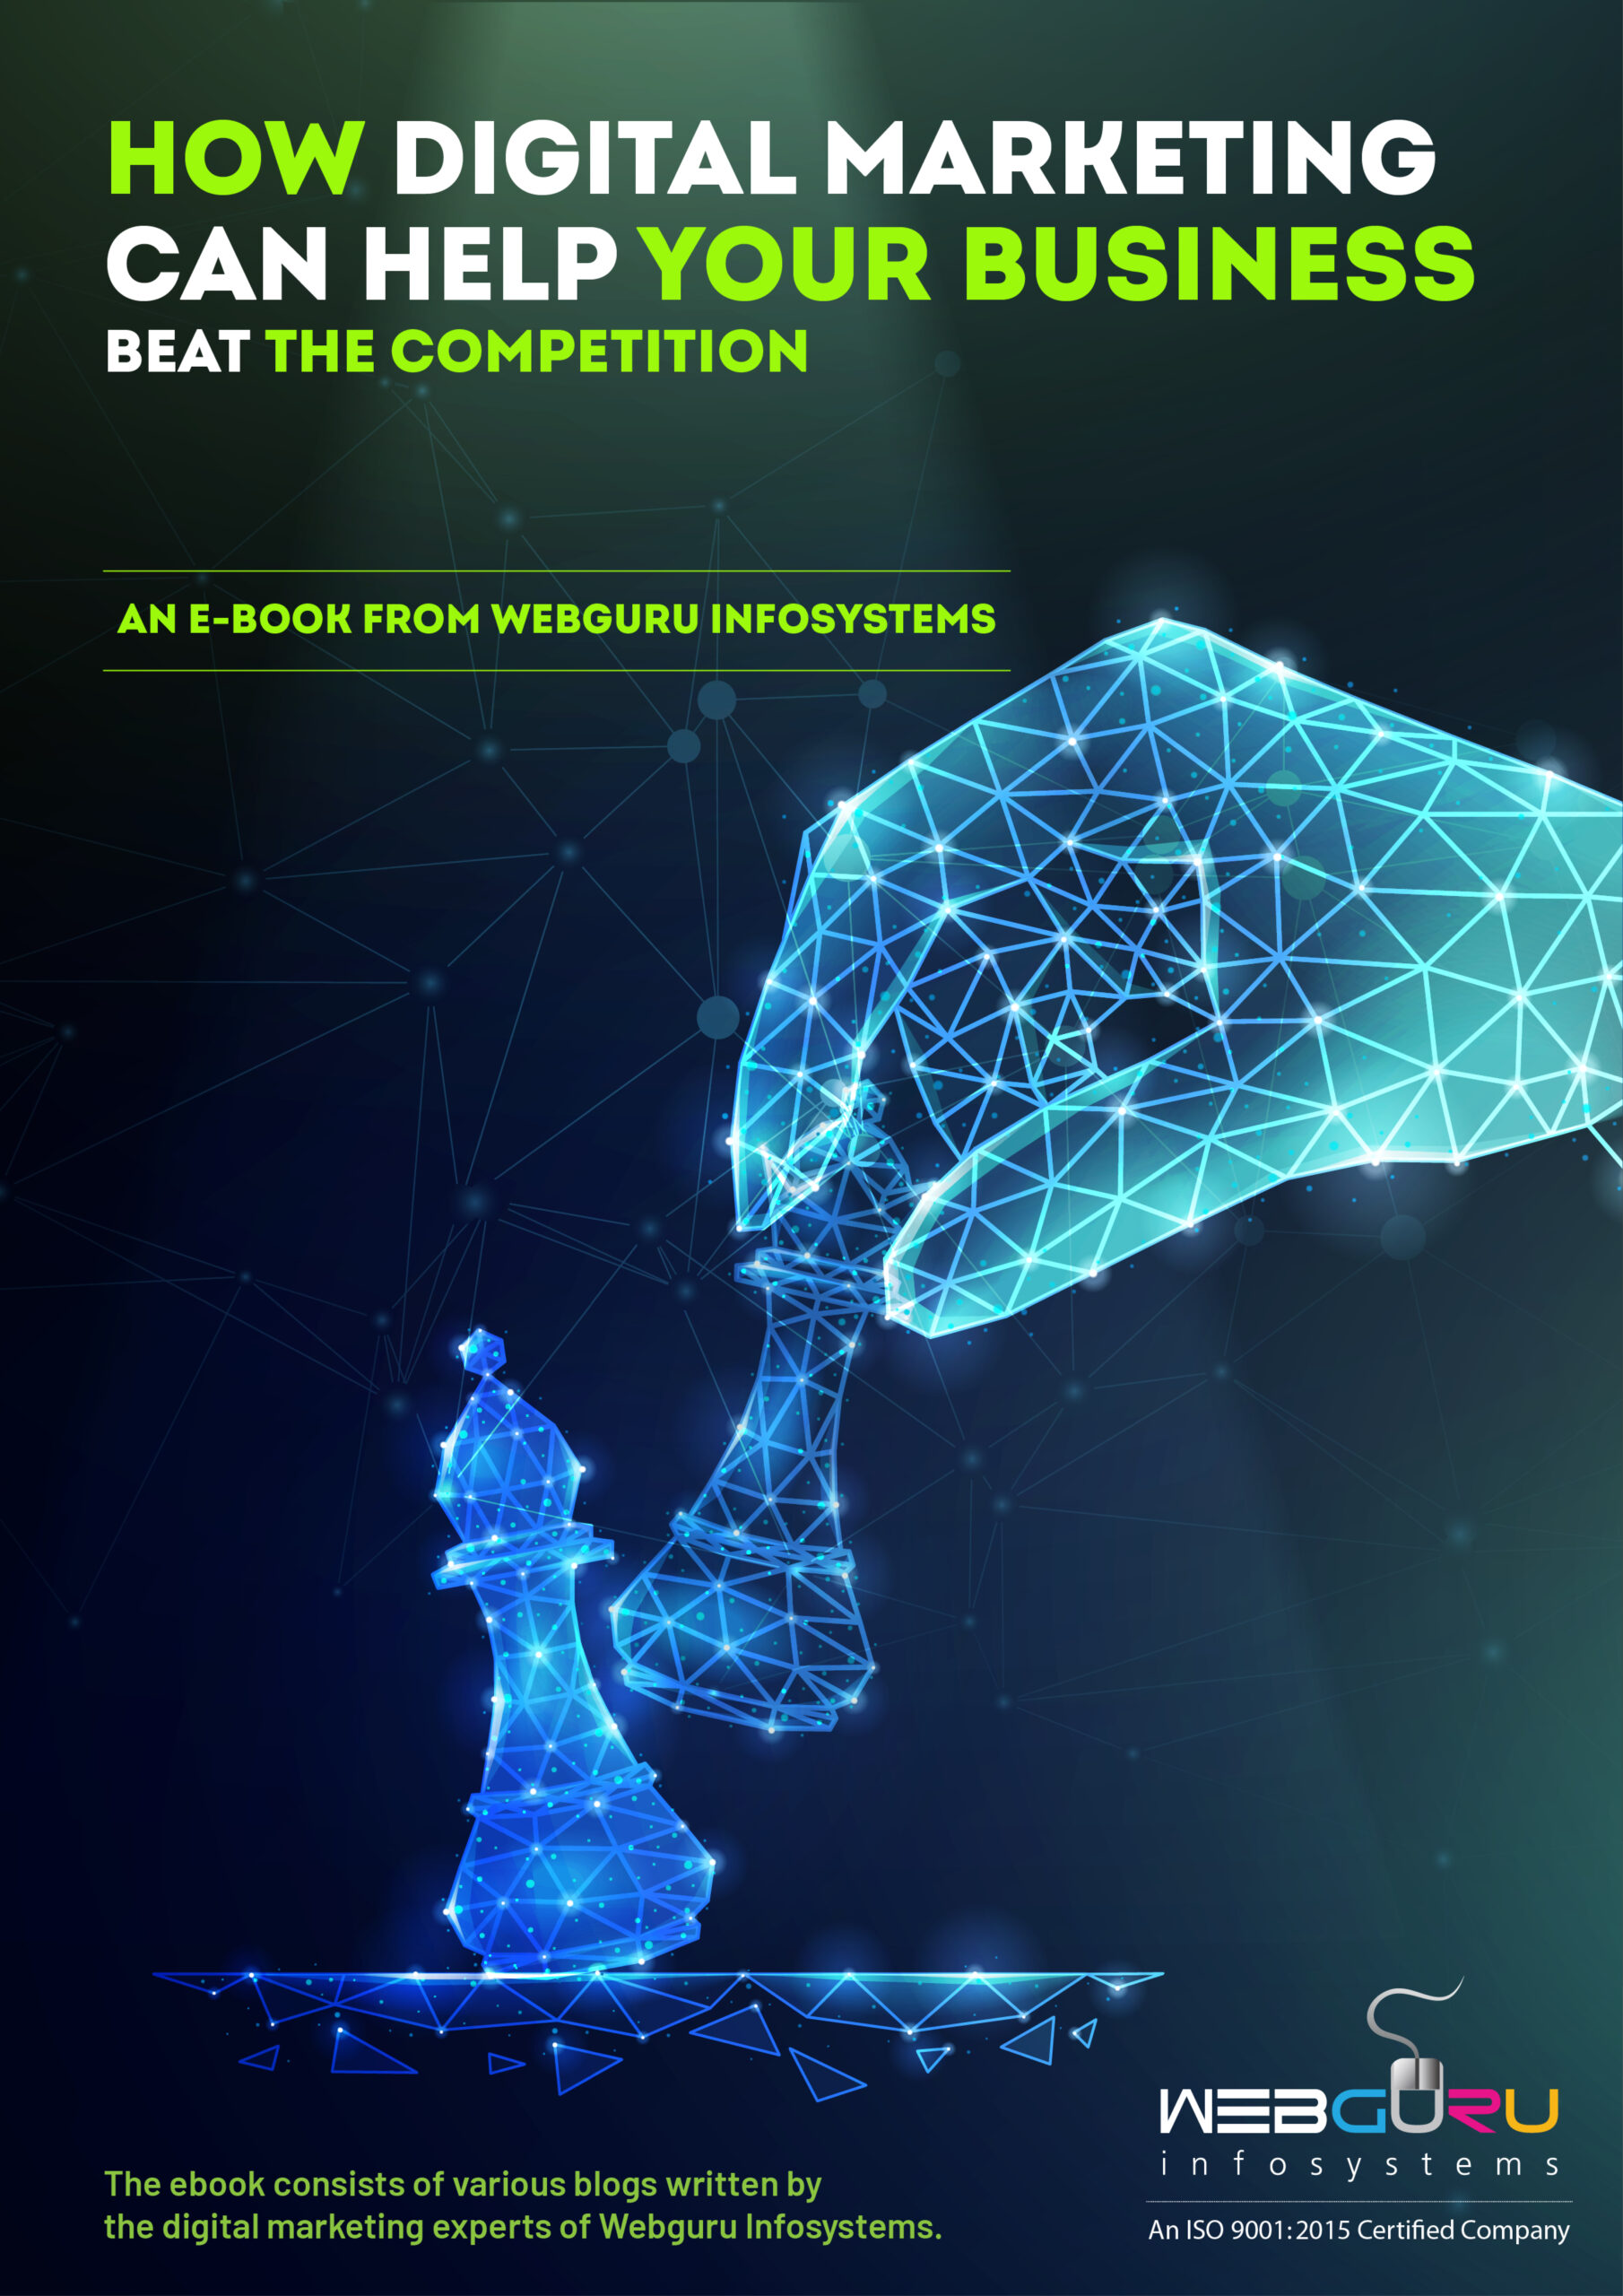 FREE: How Digital Marketing Can Help Your Business Beat the Competition by Webguru Infosystems